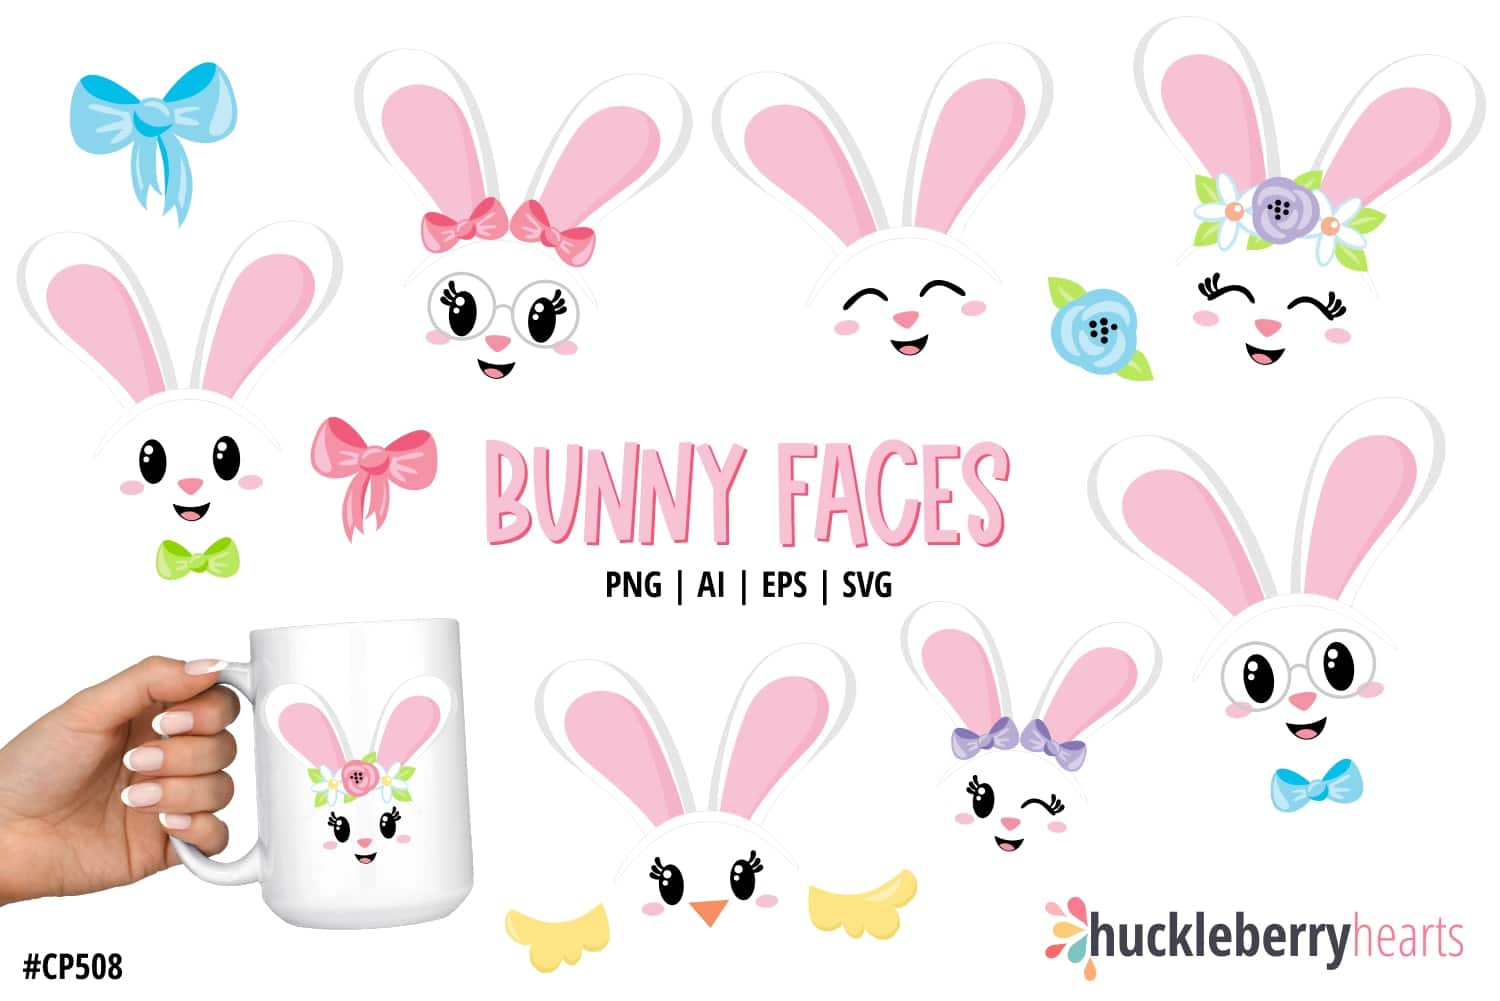 https://www.huckleberry-hearts.com/wp-content/uploads/2020/11/Bunny-Faces-Clipart-CP508-Sample-2.jpg